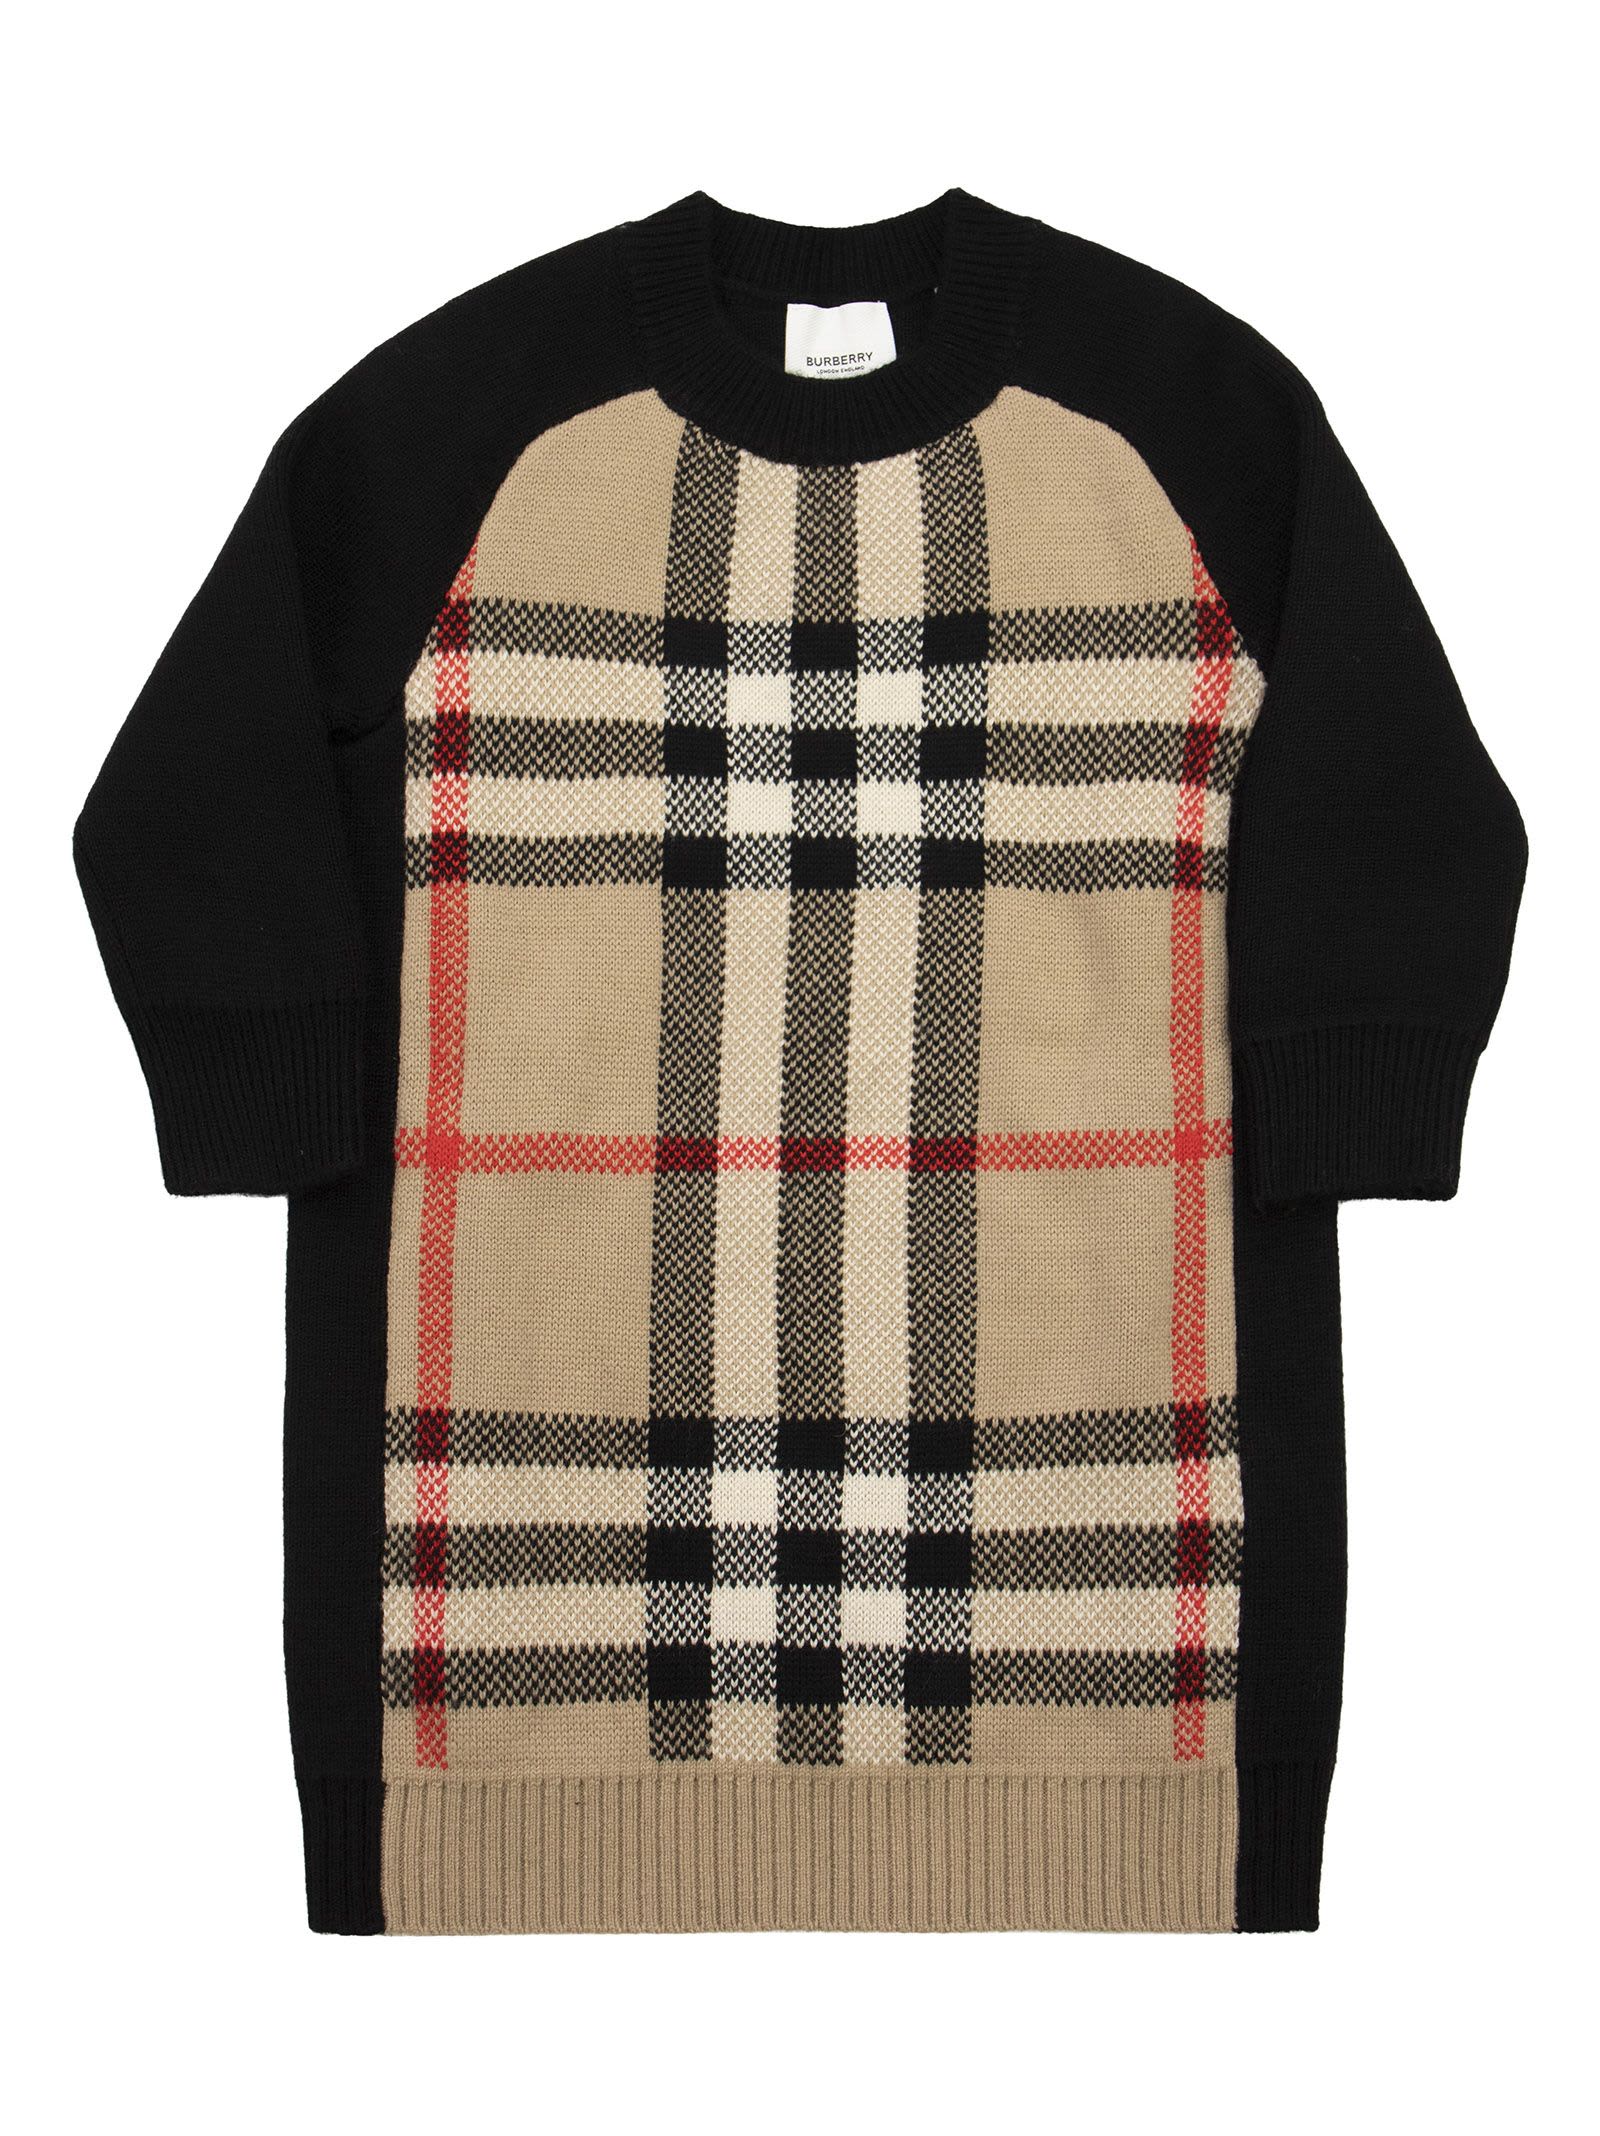 Burberry Dianne - Wool And Cashmere Knit Dress With Jacquard Tartan Pattern